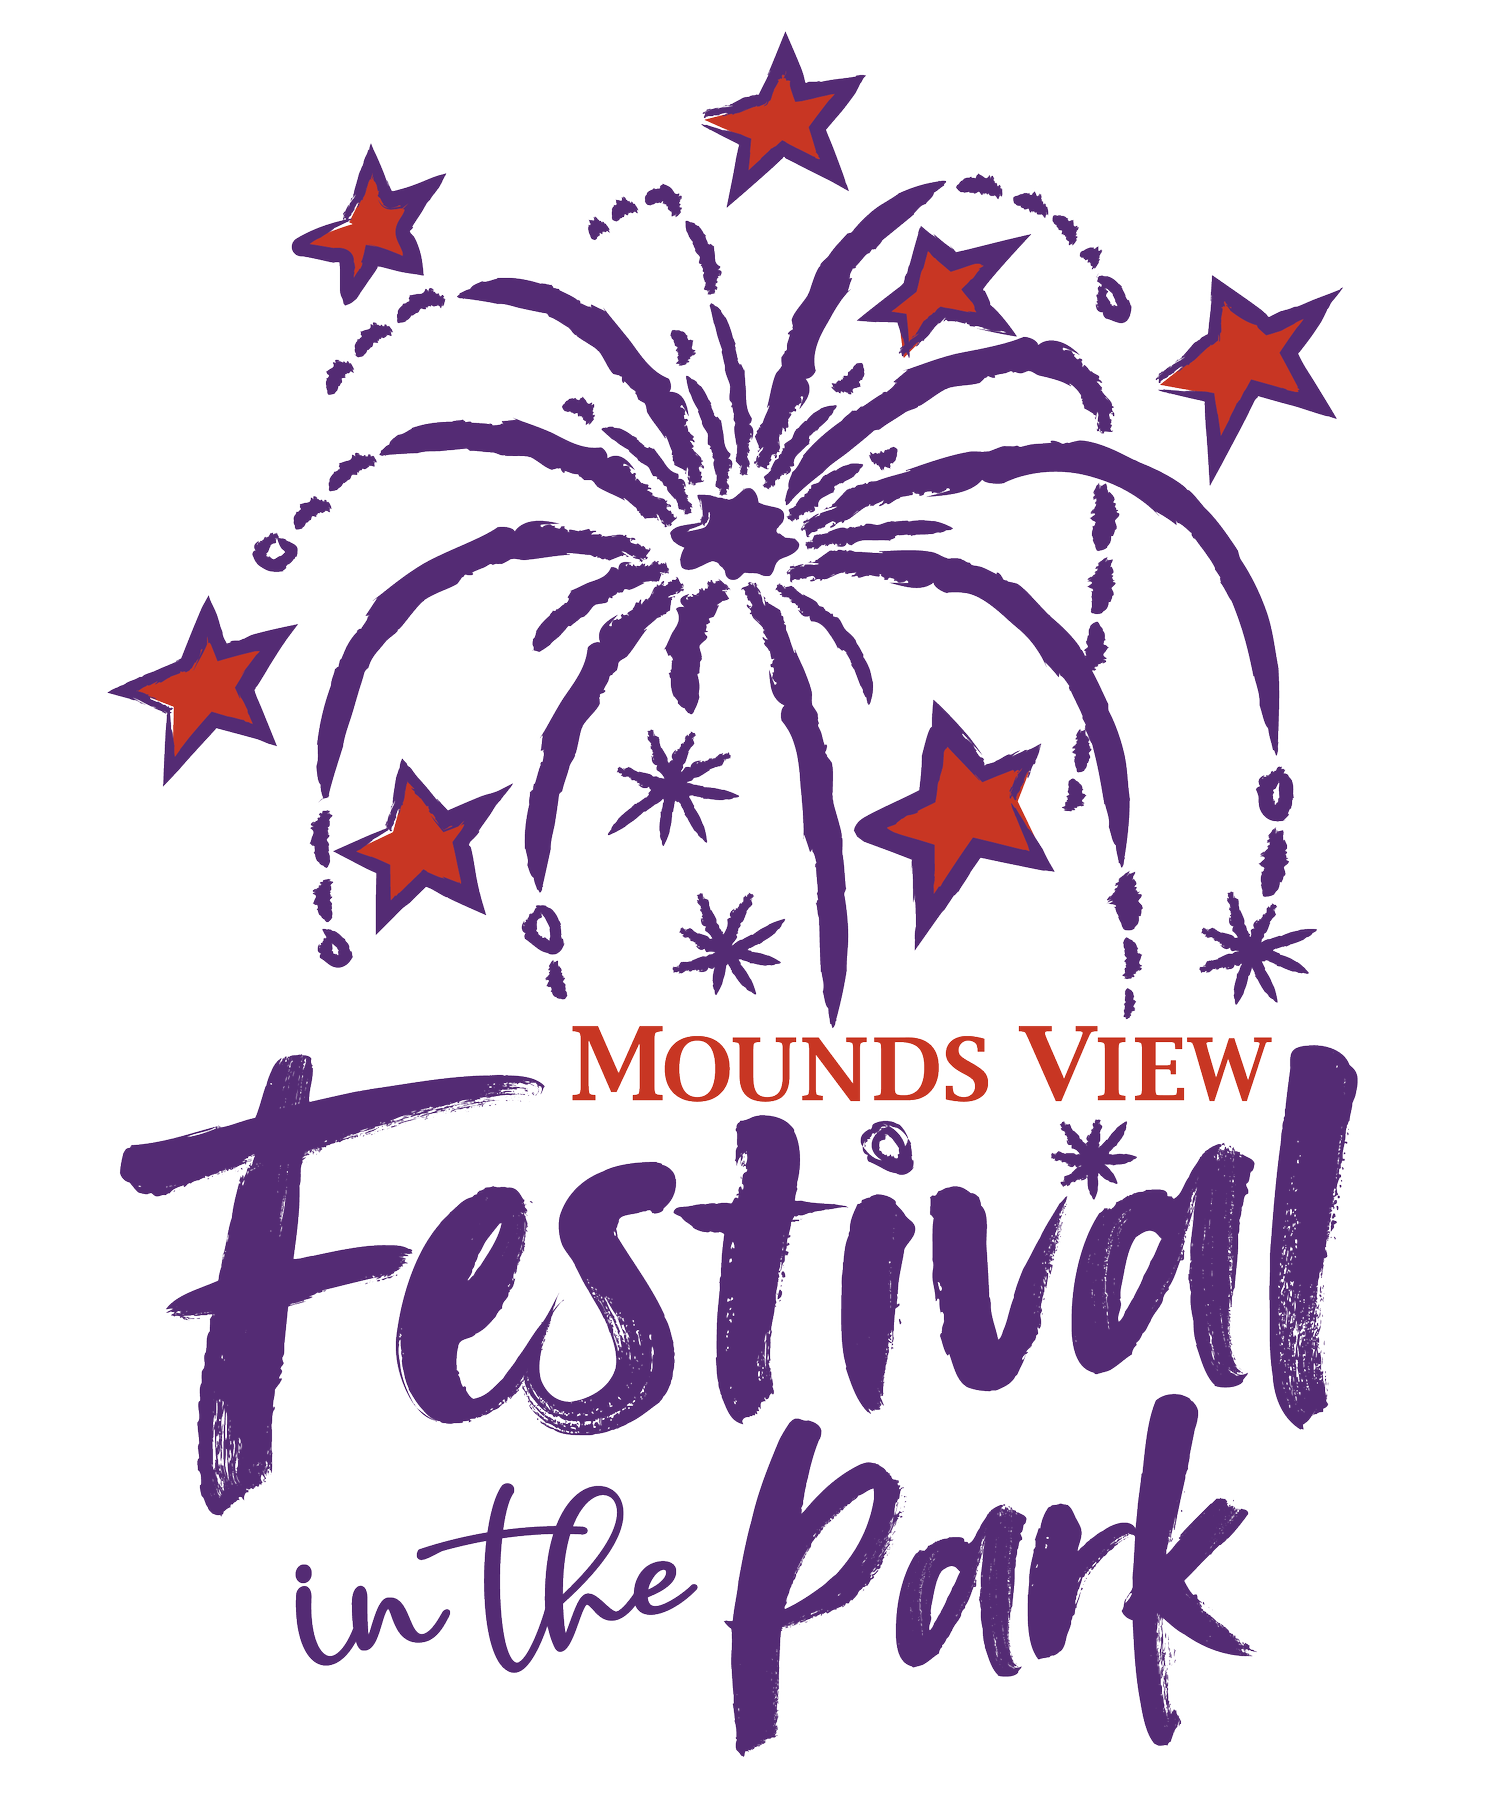 Mounds View Festival in the Park